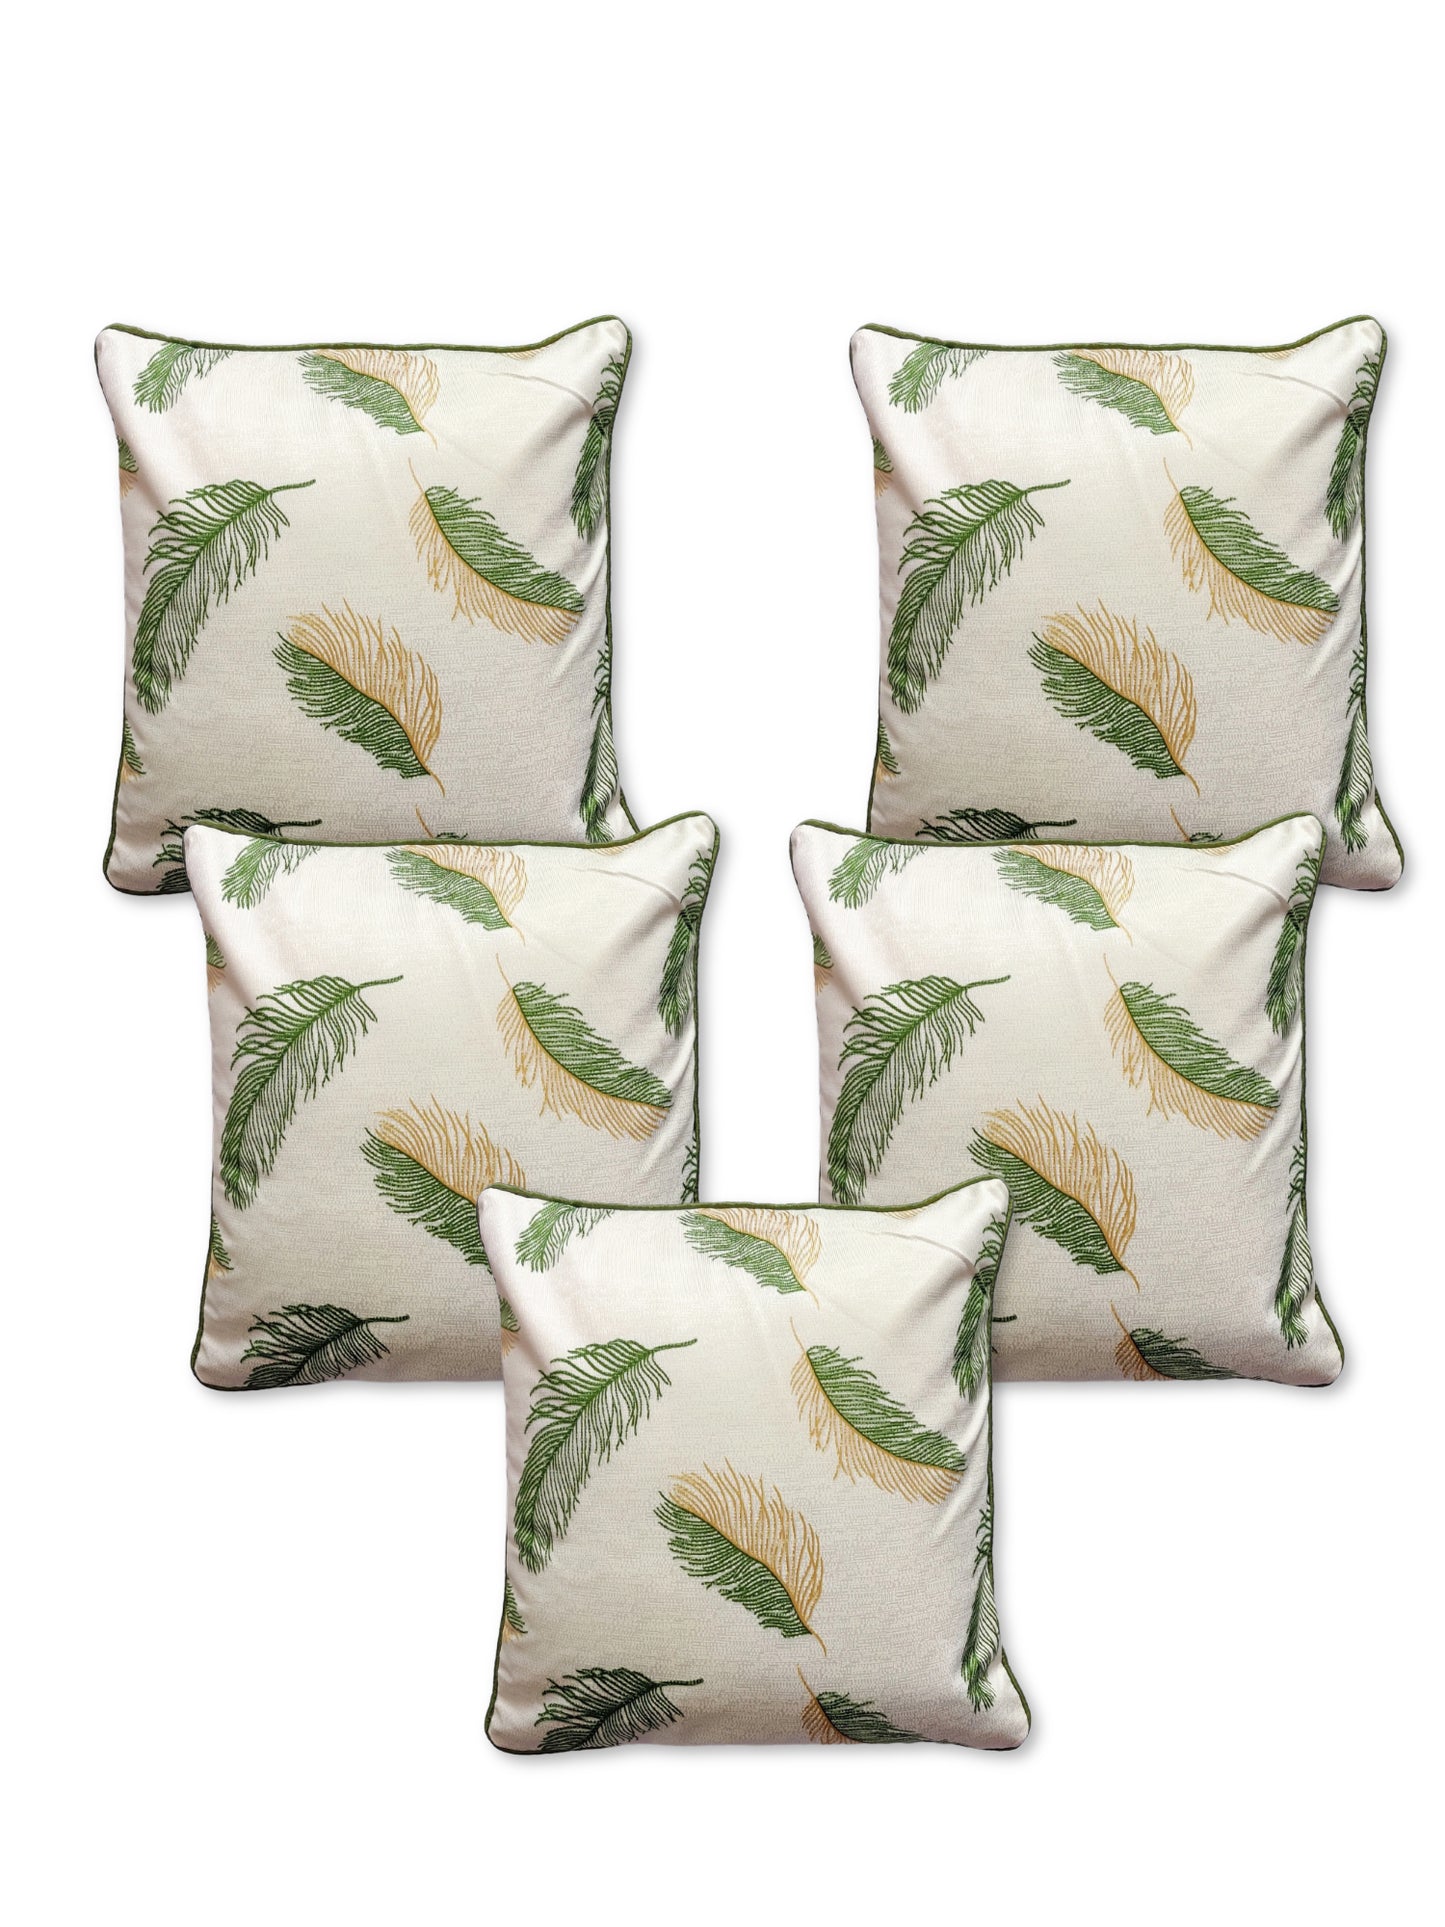 ARTSY® Green and White Cushion Cover Set - Pack of 5